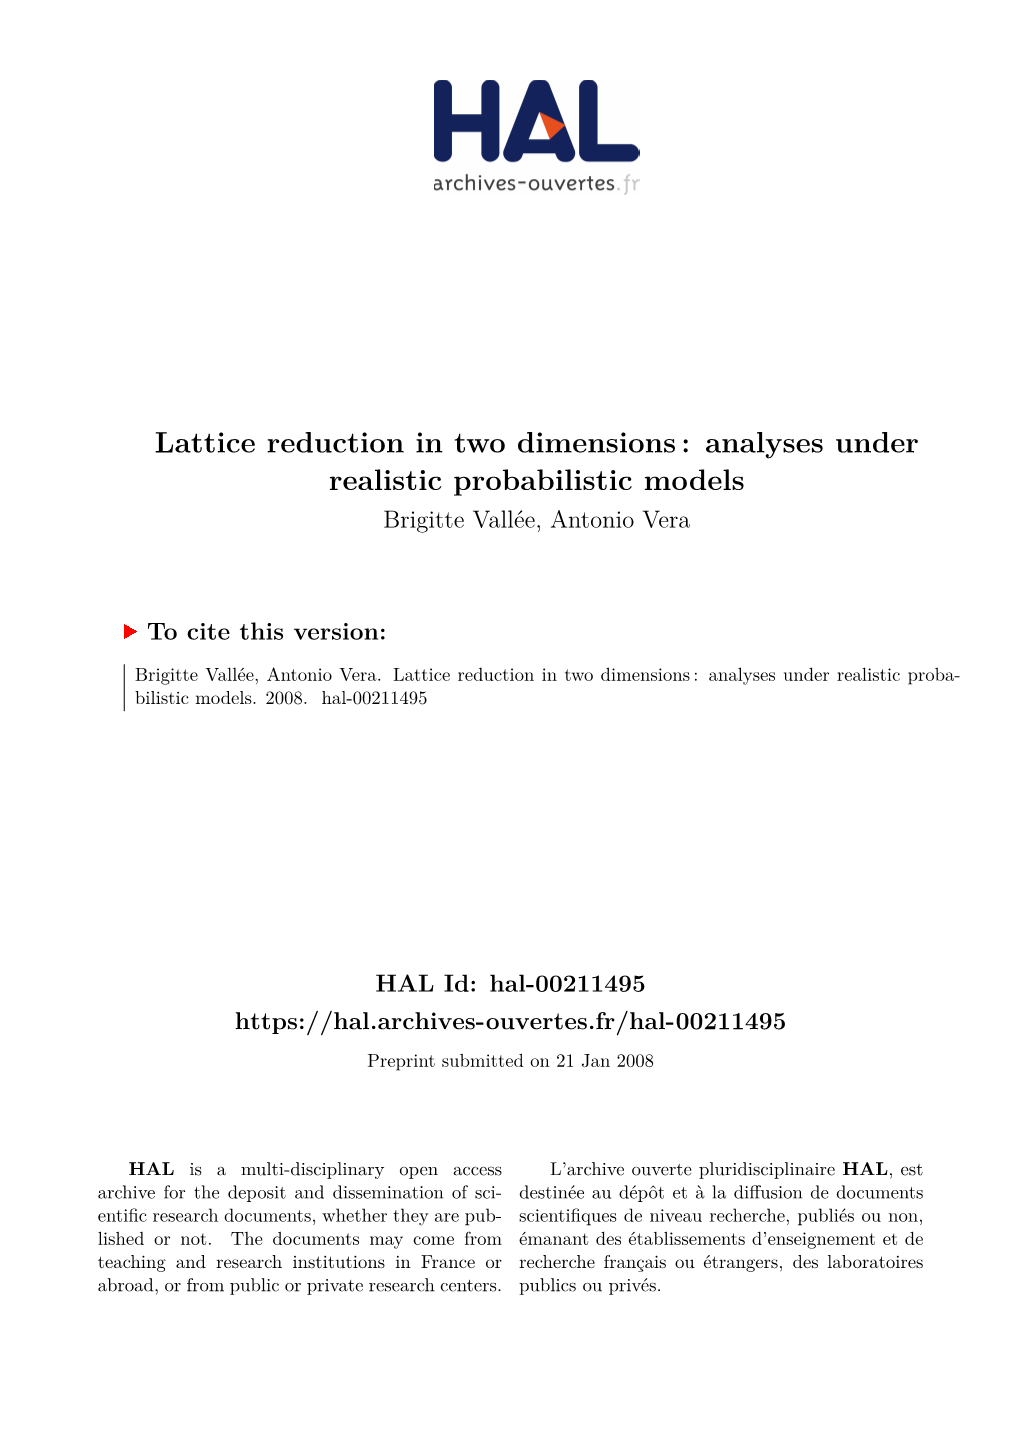 Lattice Reduction in Two Dimensions: Analyses Under Realistic Probabilistic Models